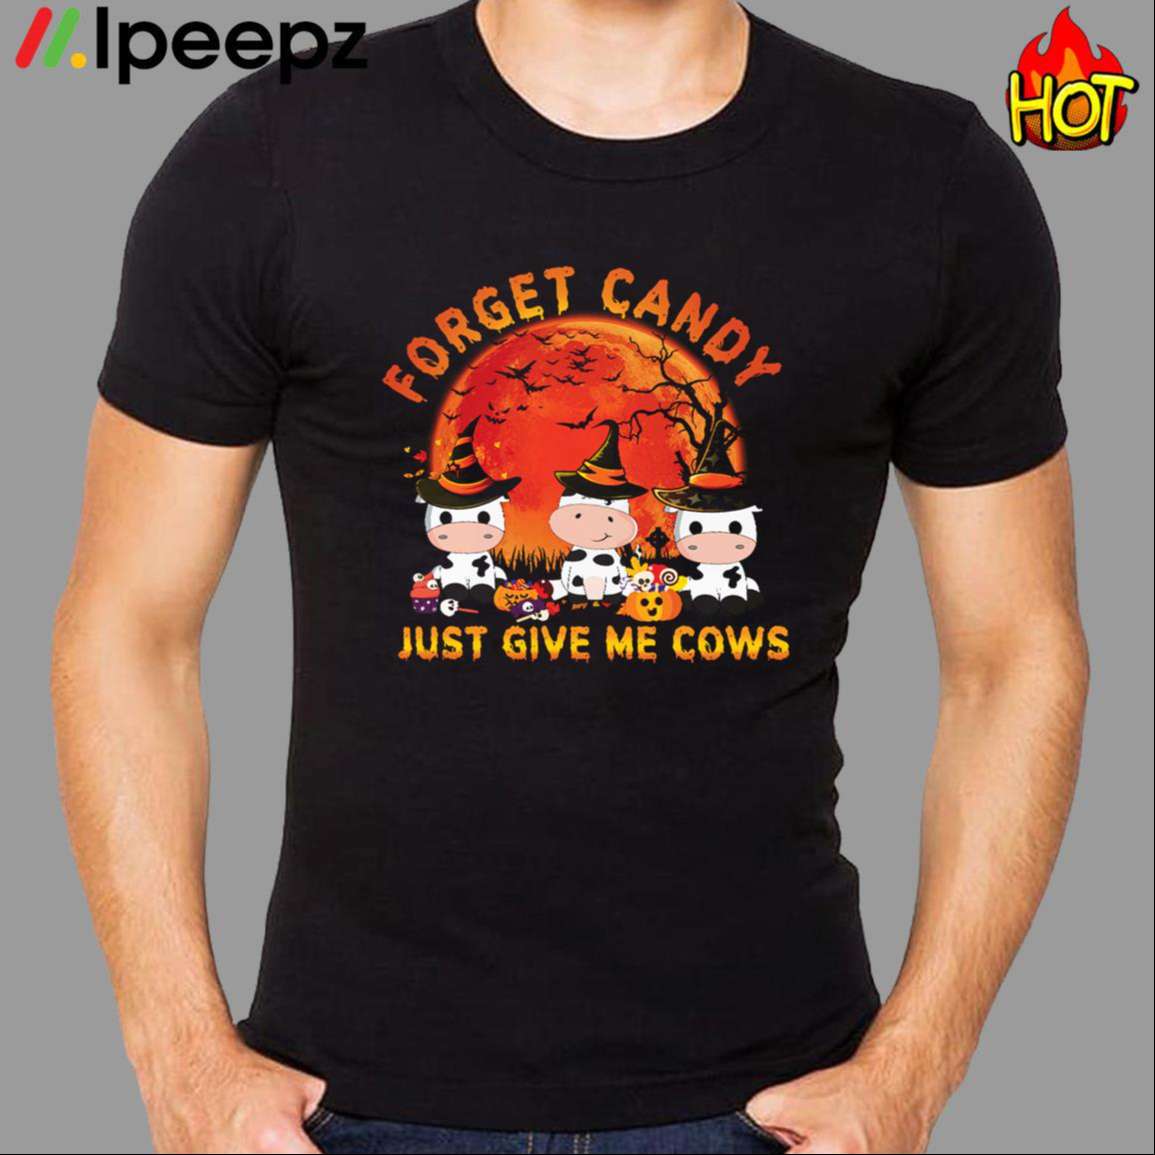 Forget Candy Just Give Me Cows Halloween Shirt 1 Copy